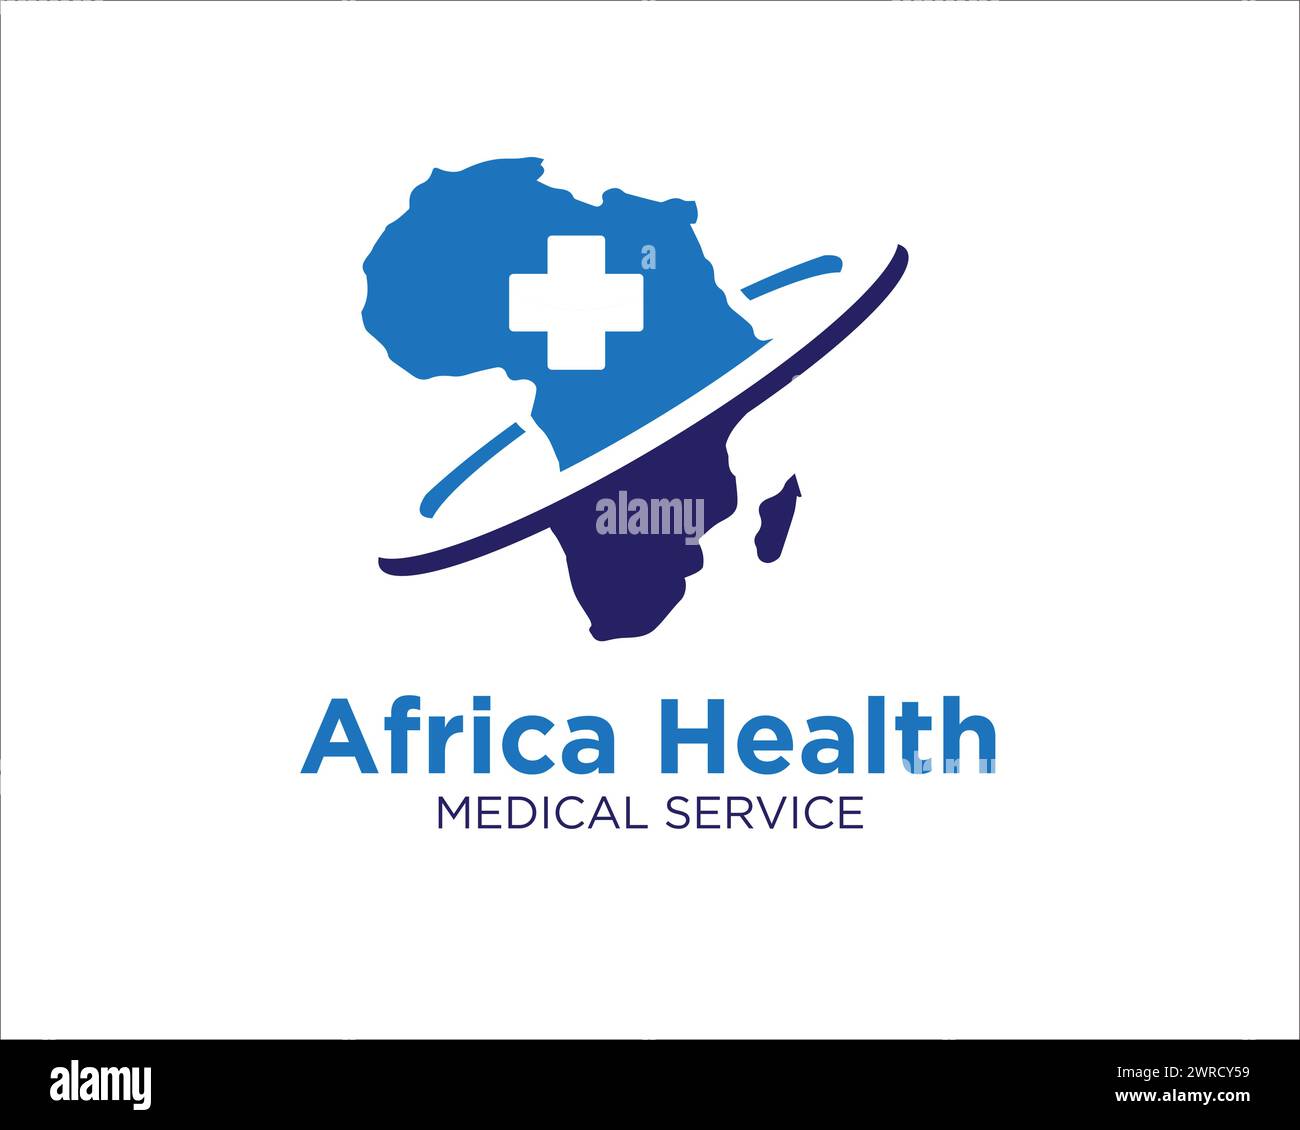 africa health logo designs for medical service in africa Stock Vector